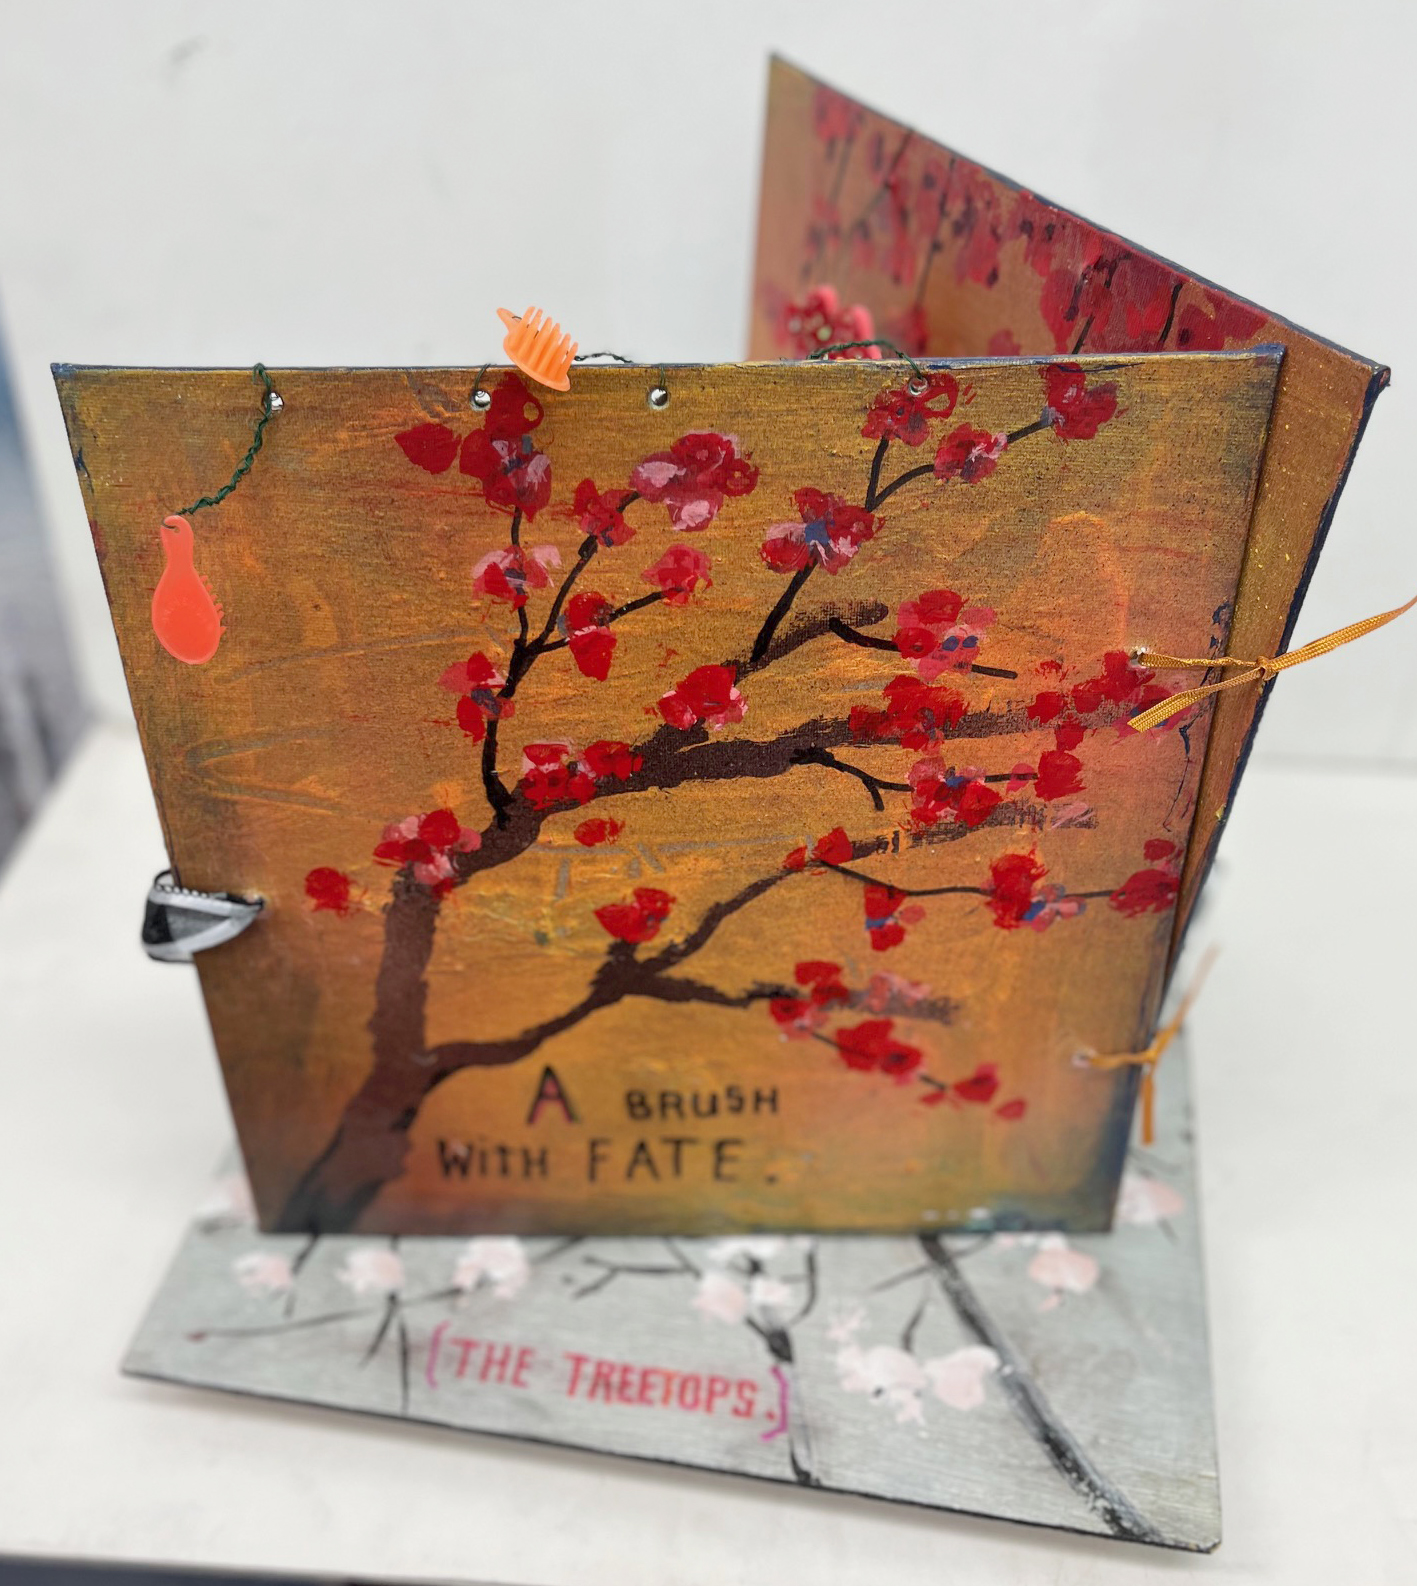 Artists' book with cherry blossom branch